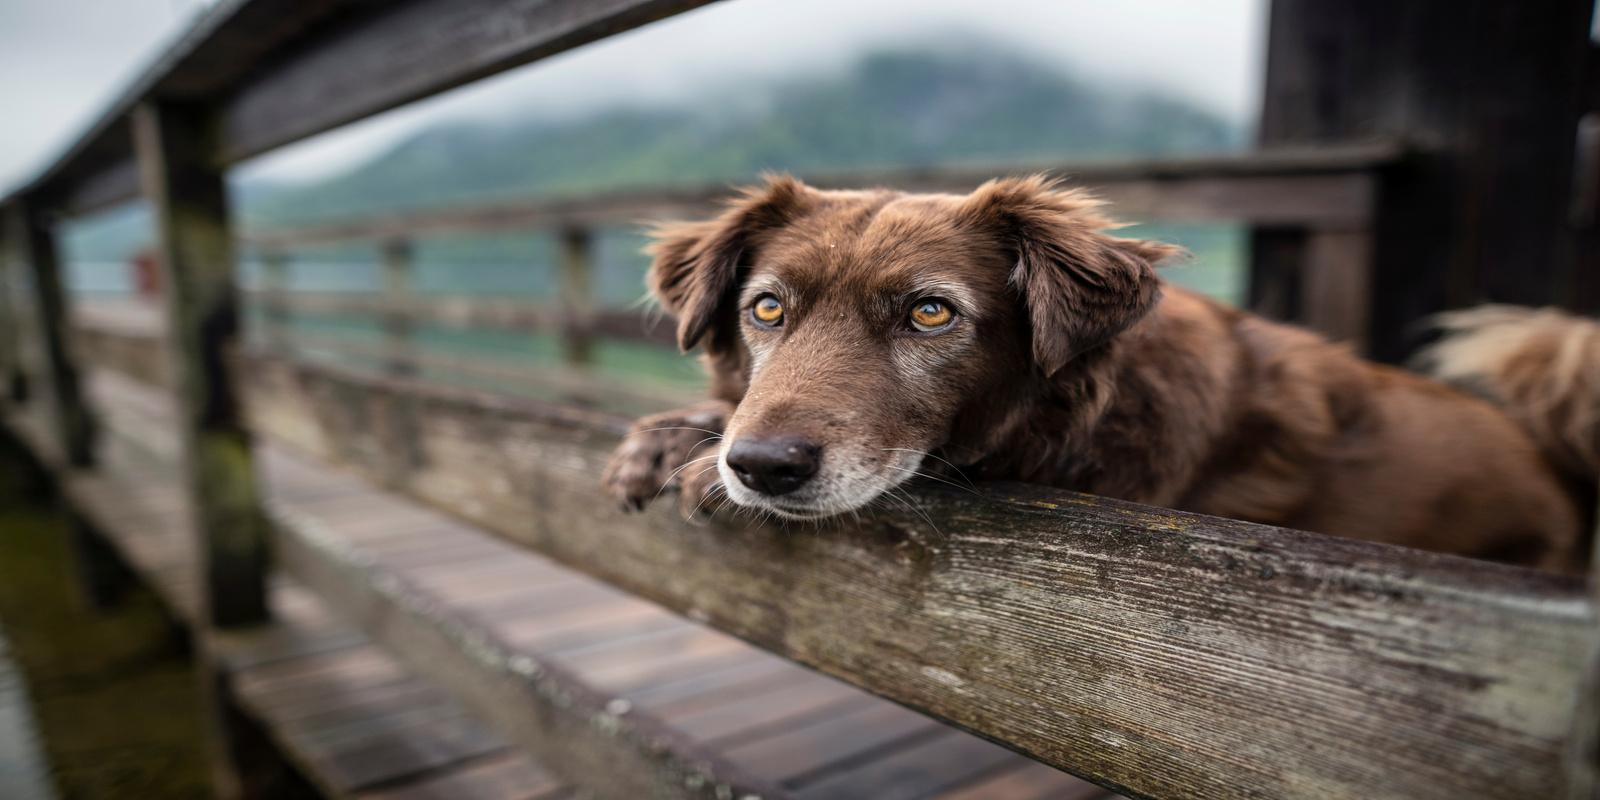 A senior dog staring from a wooden walkway bridge